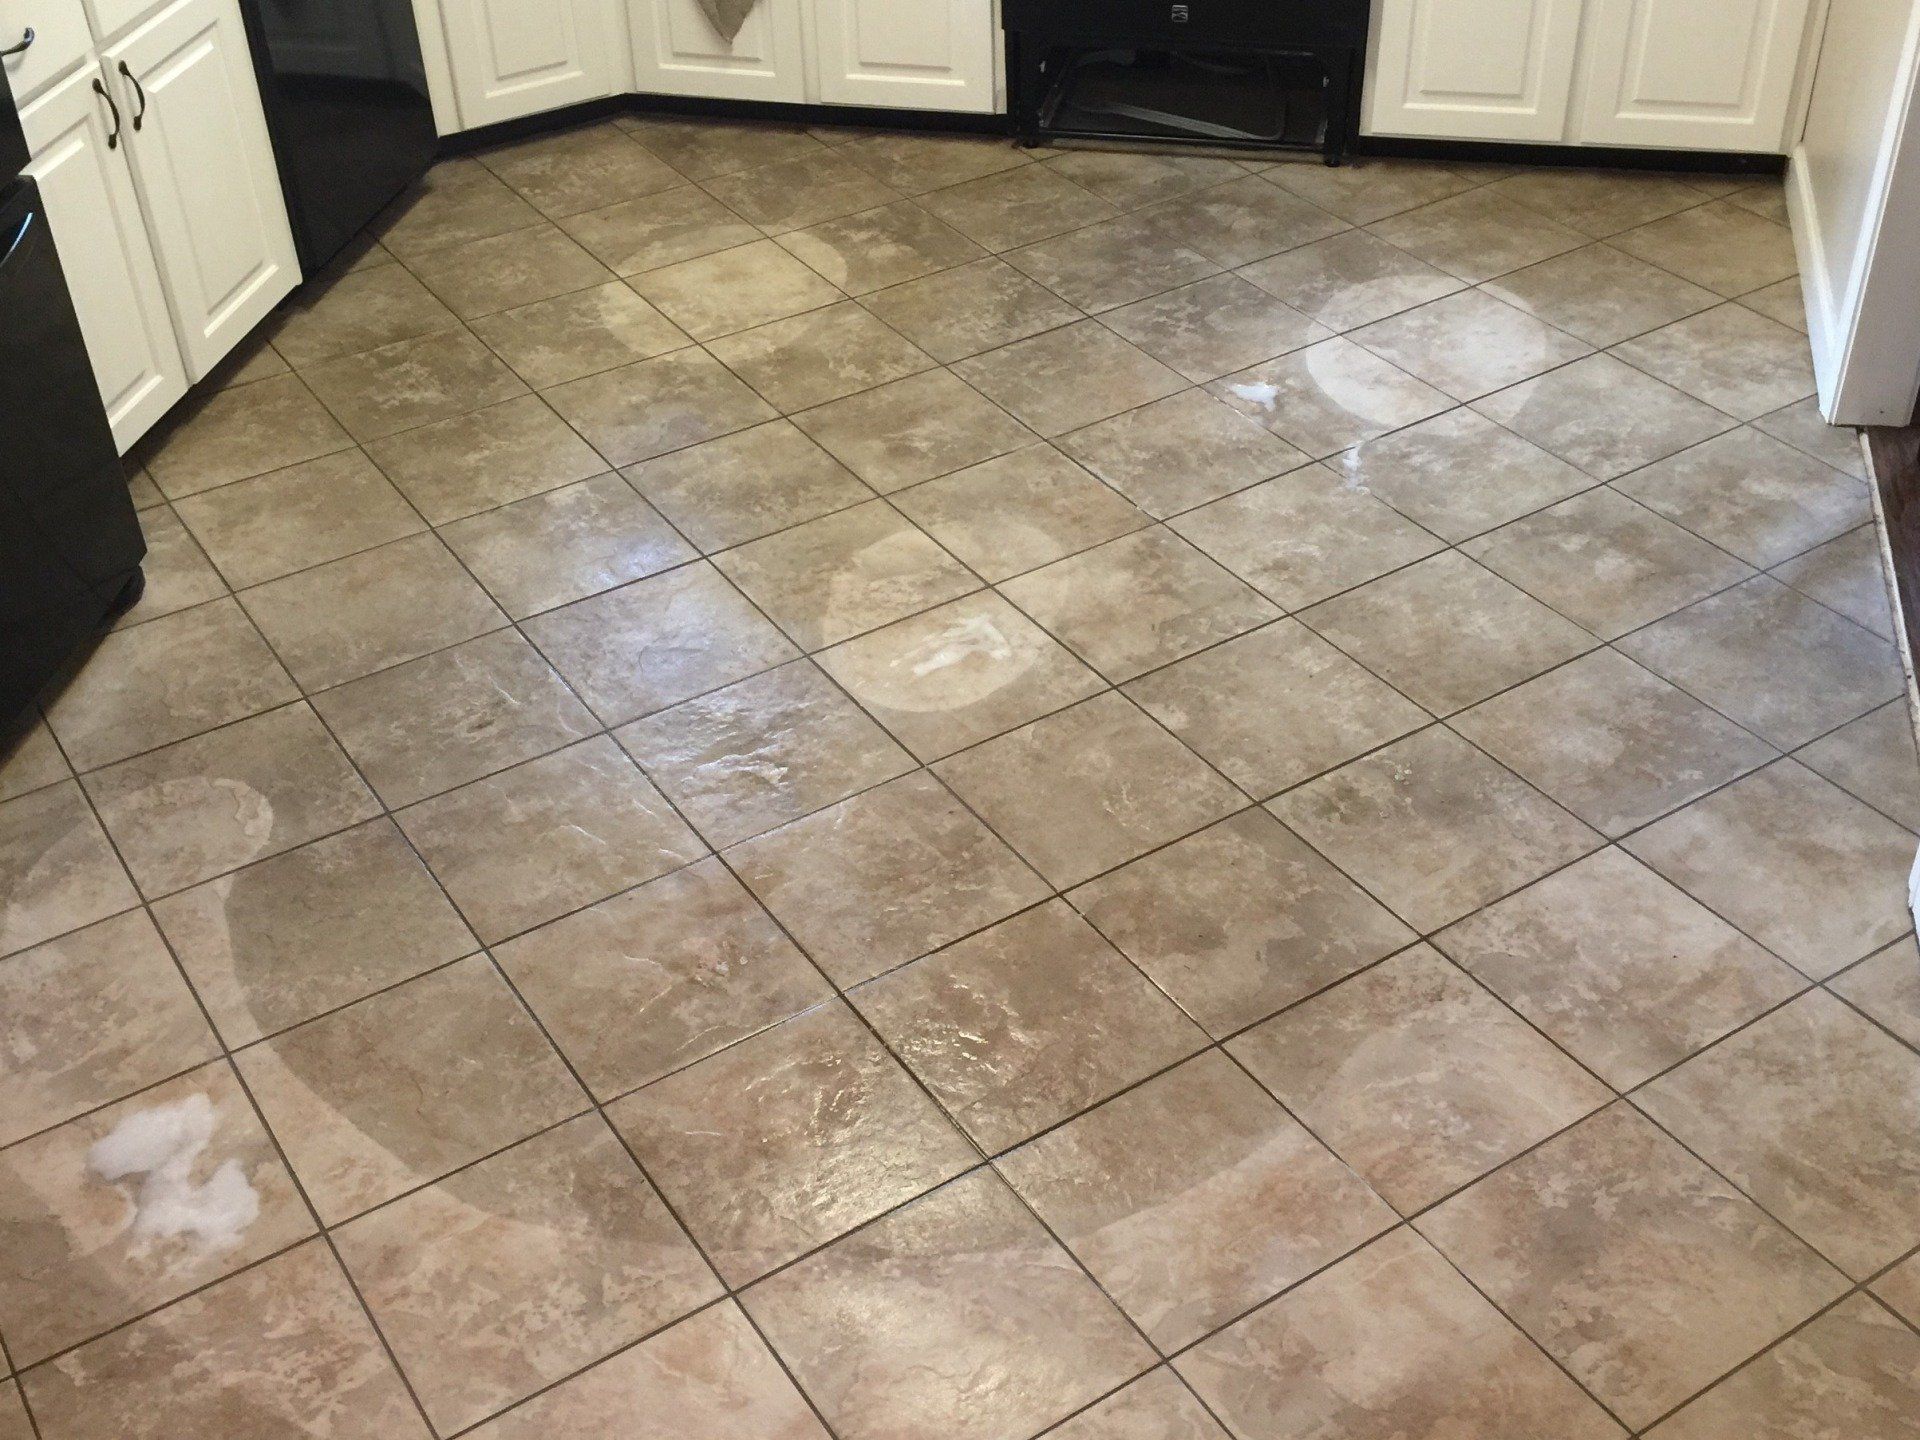 Shiny tile in the kitchen after cleaning